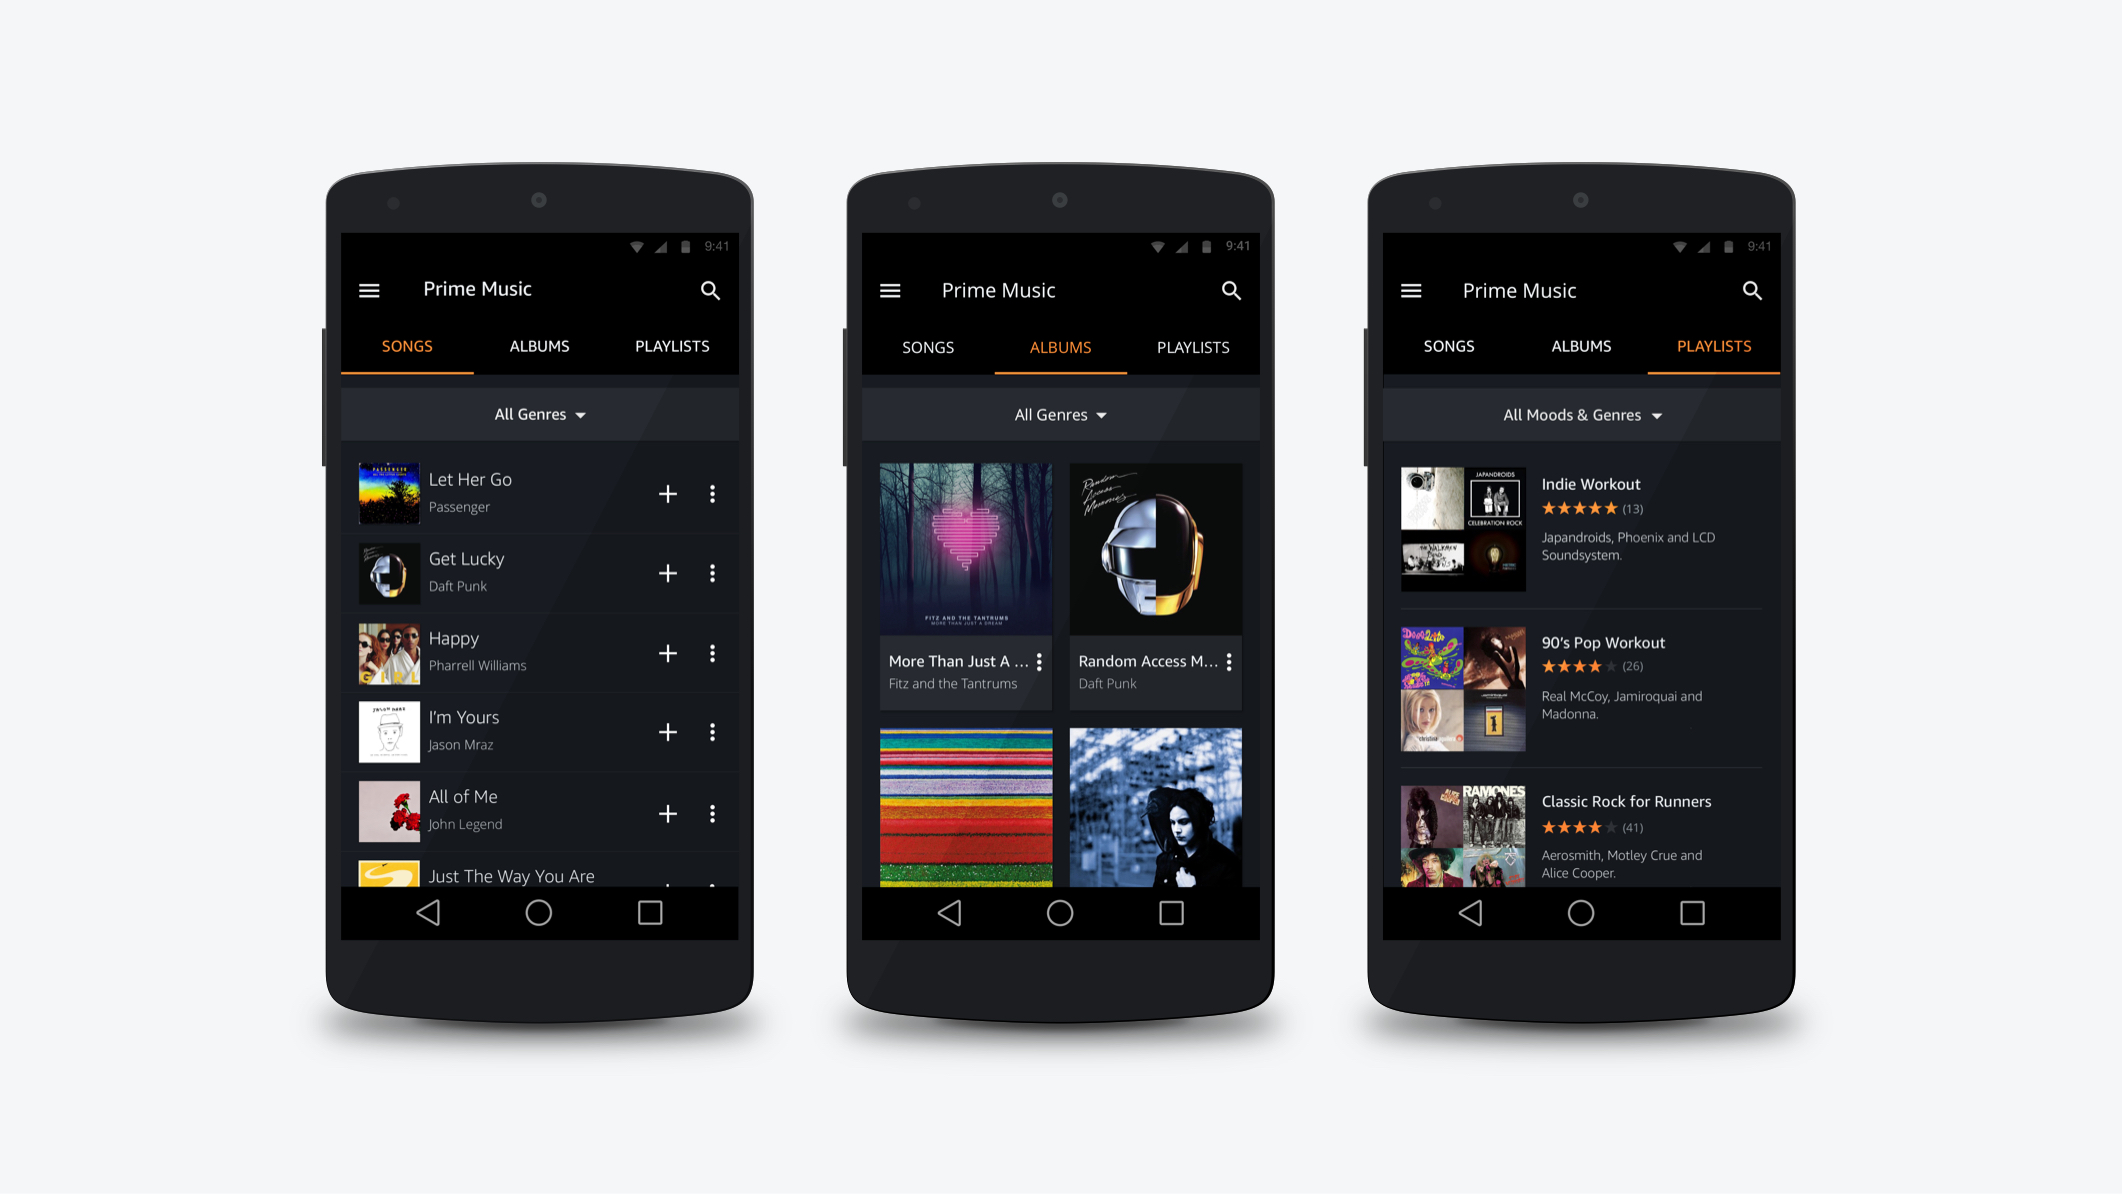 Three design composites showing the Prime Music section on Android Mobile. The designs show the 'Songs', 'Albums' and 'Prime Playlist' sections.